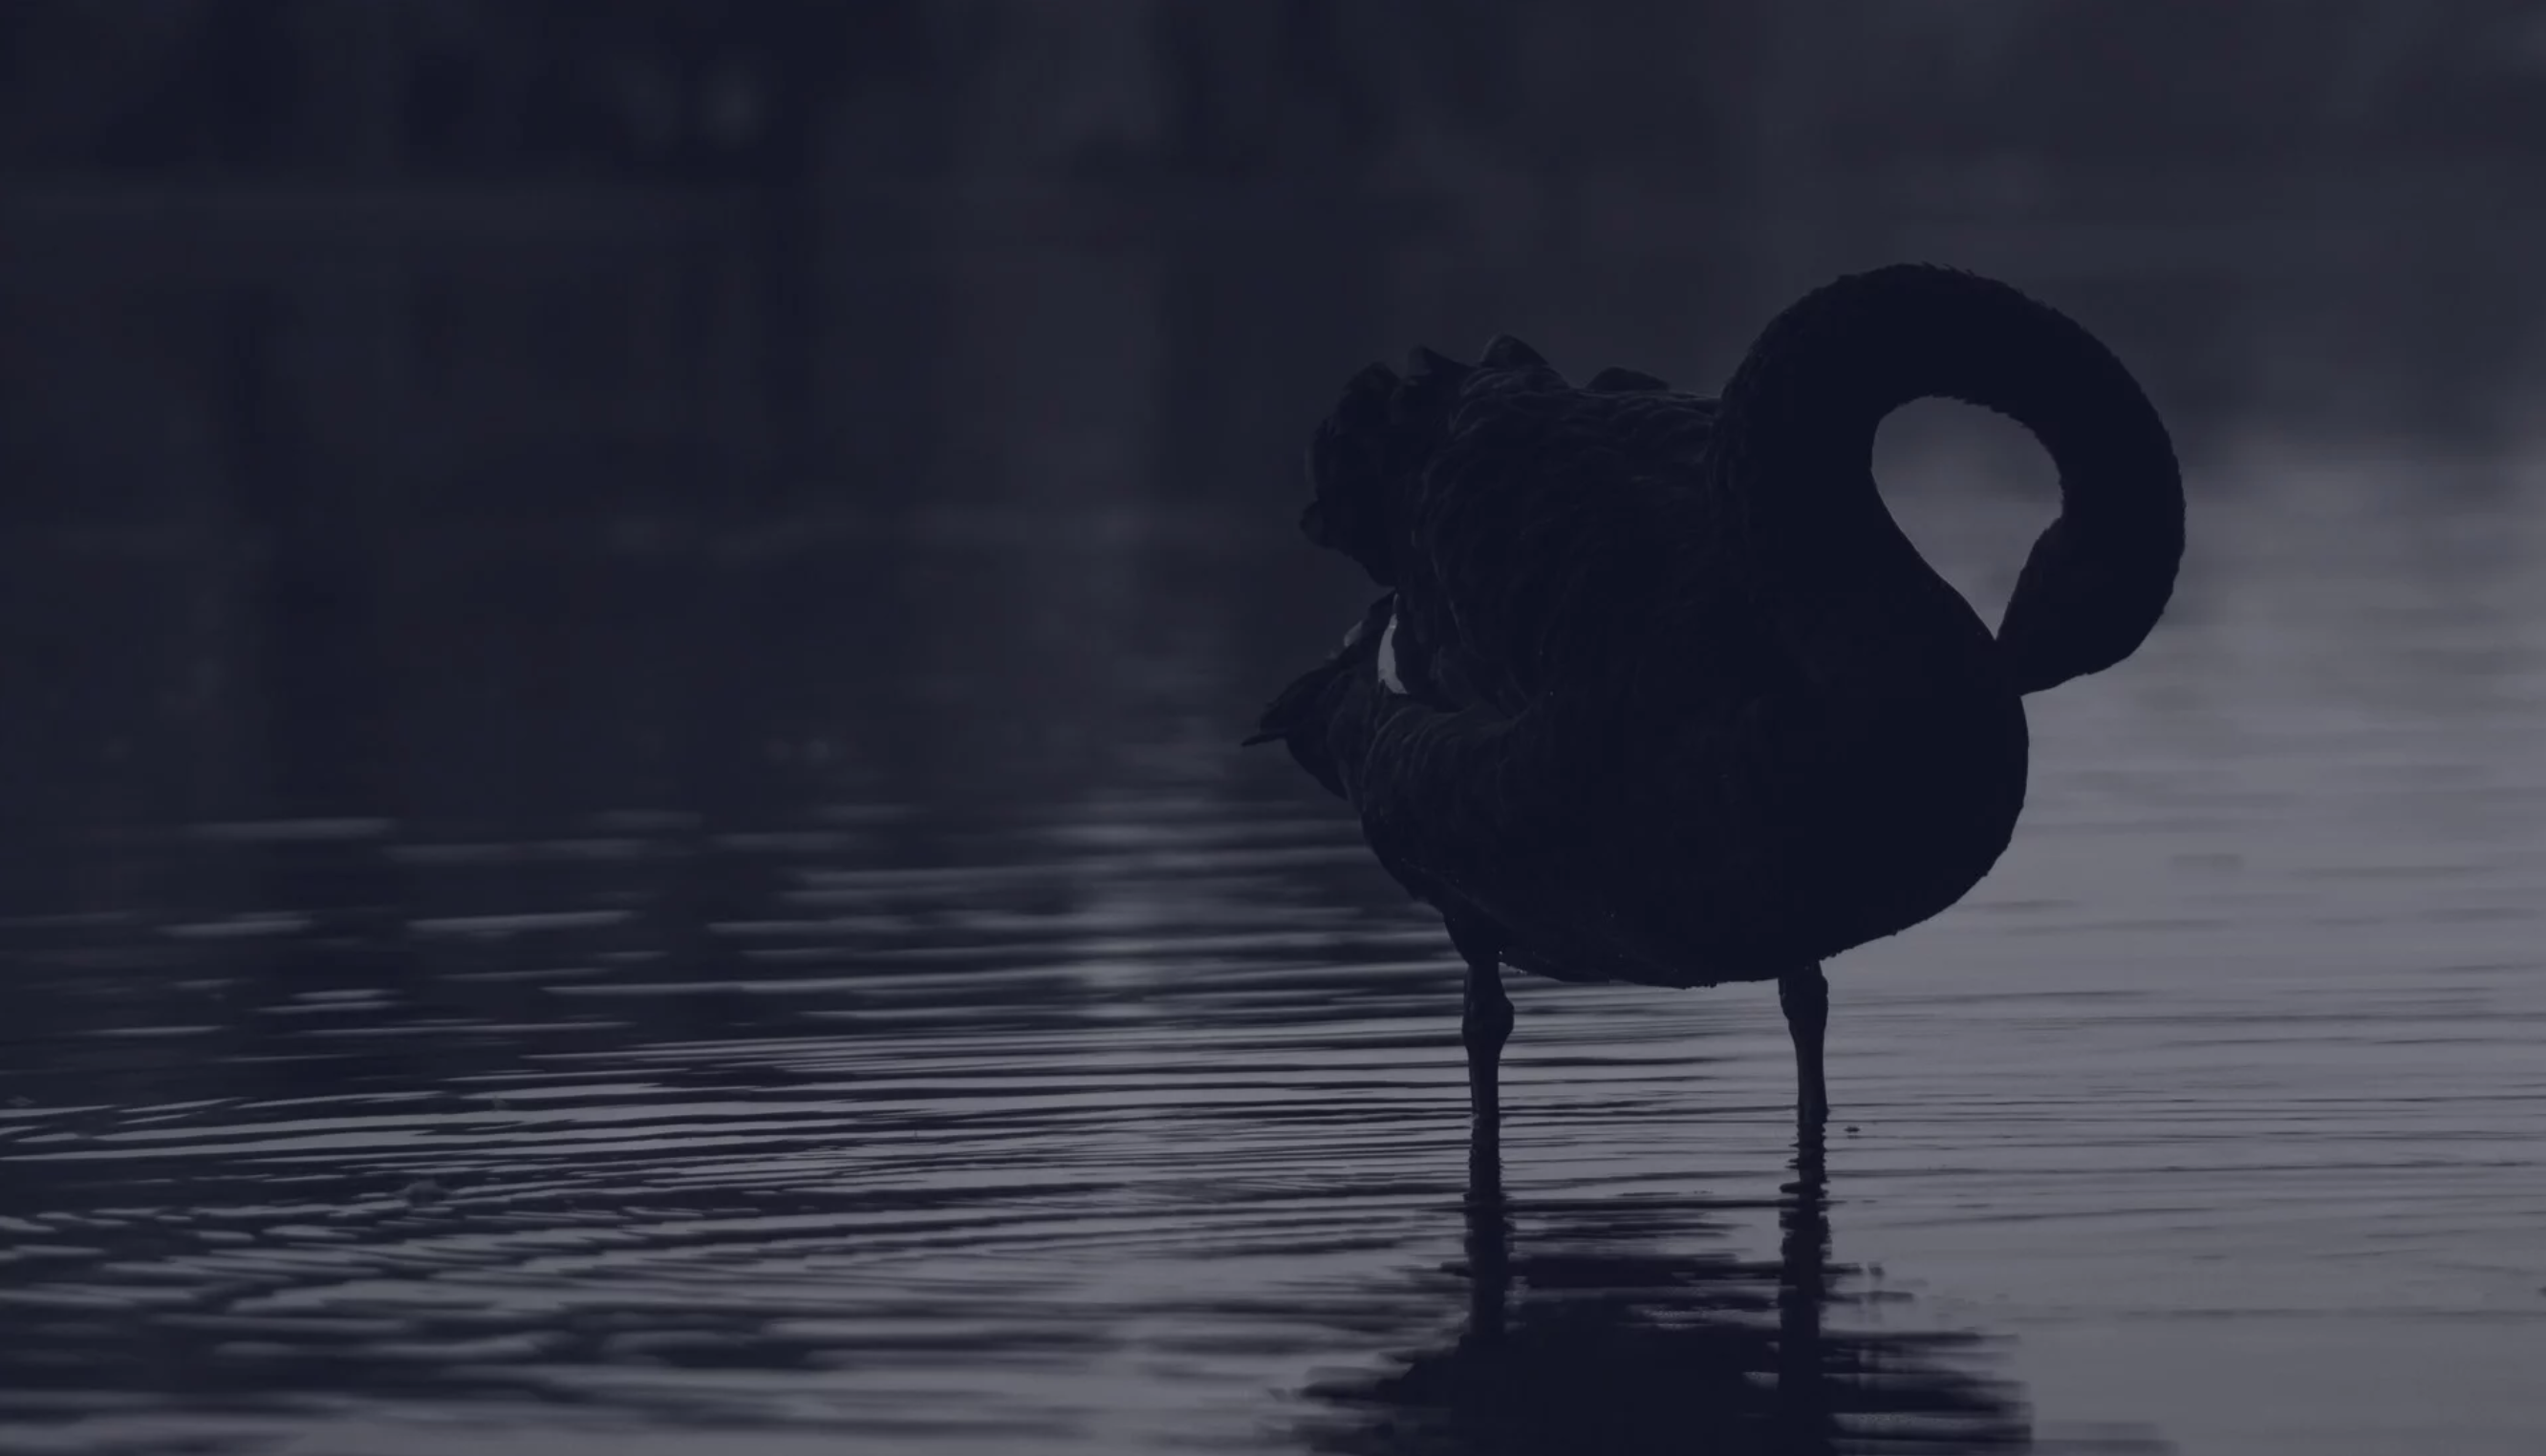 Black swan wading in body of water